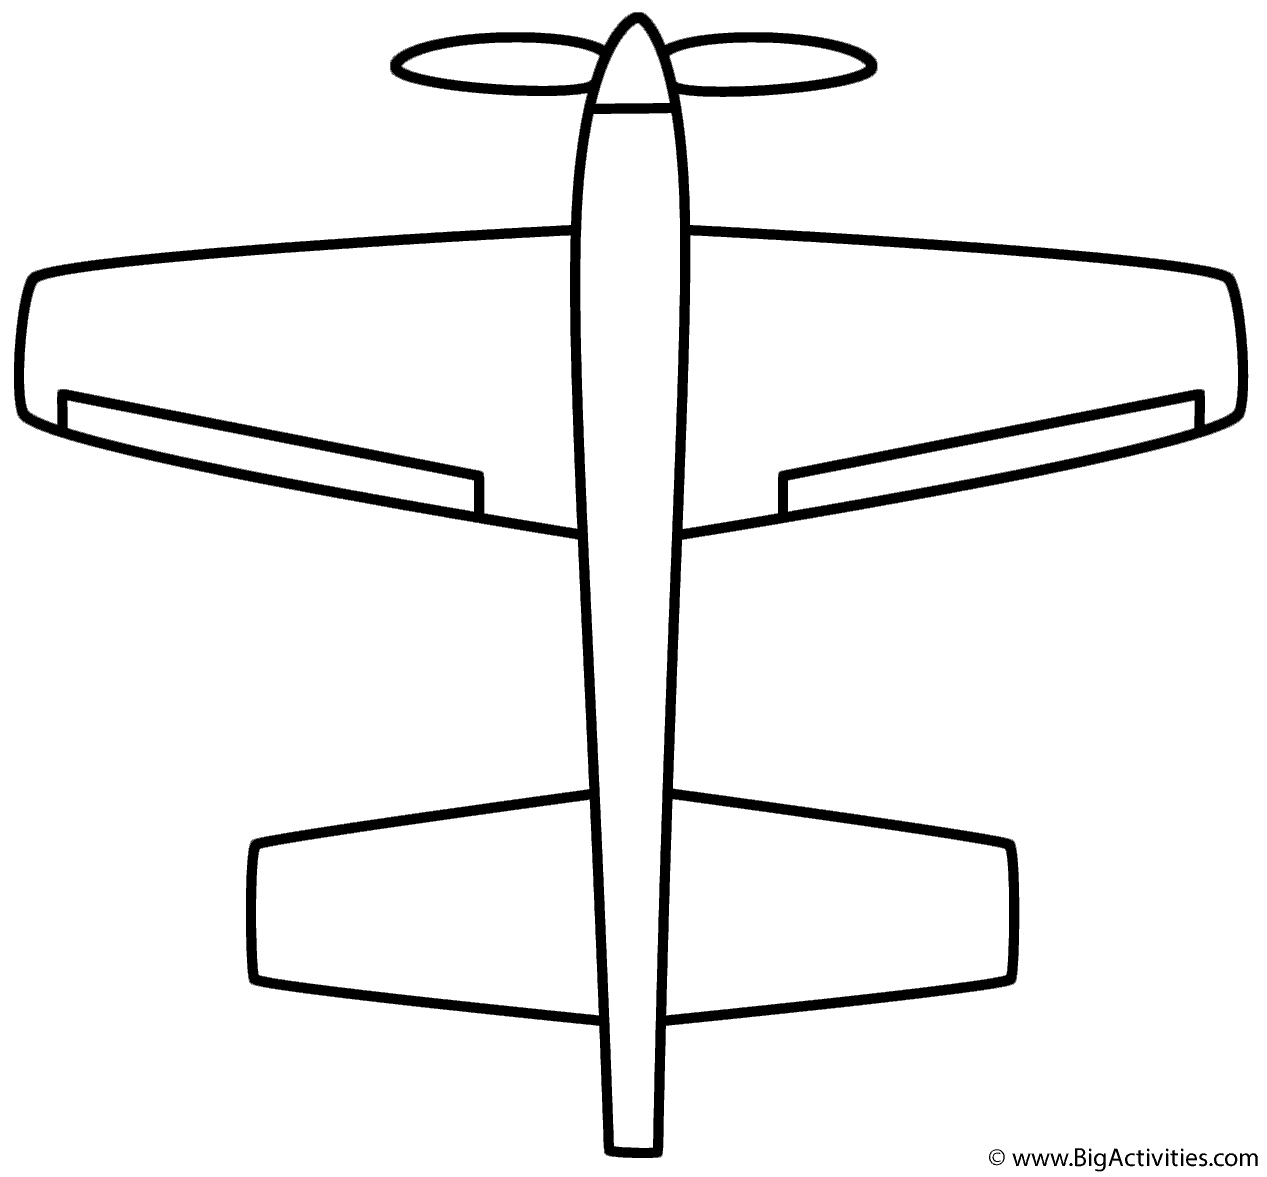 Download Simple Airplane - Coloring Page (Transportation)